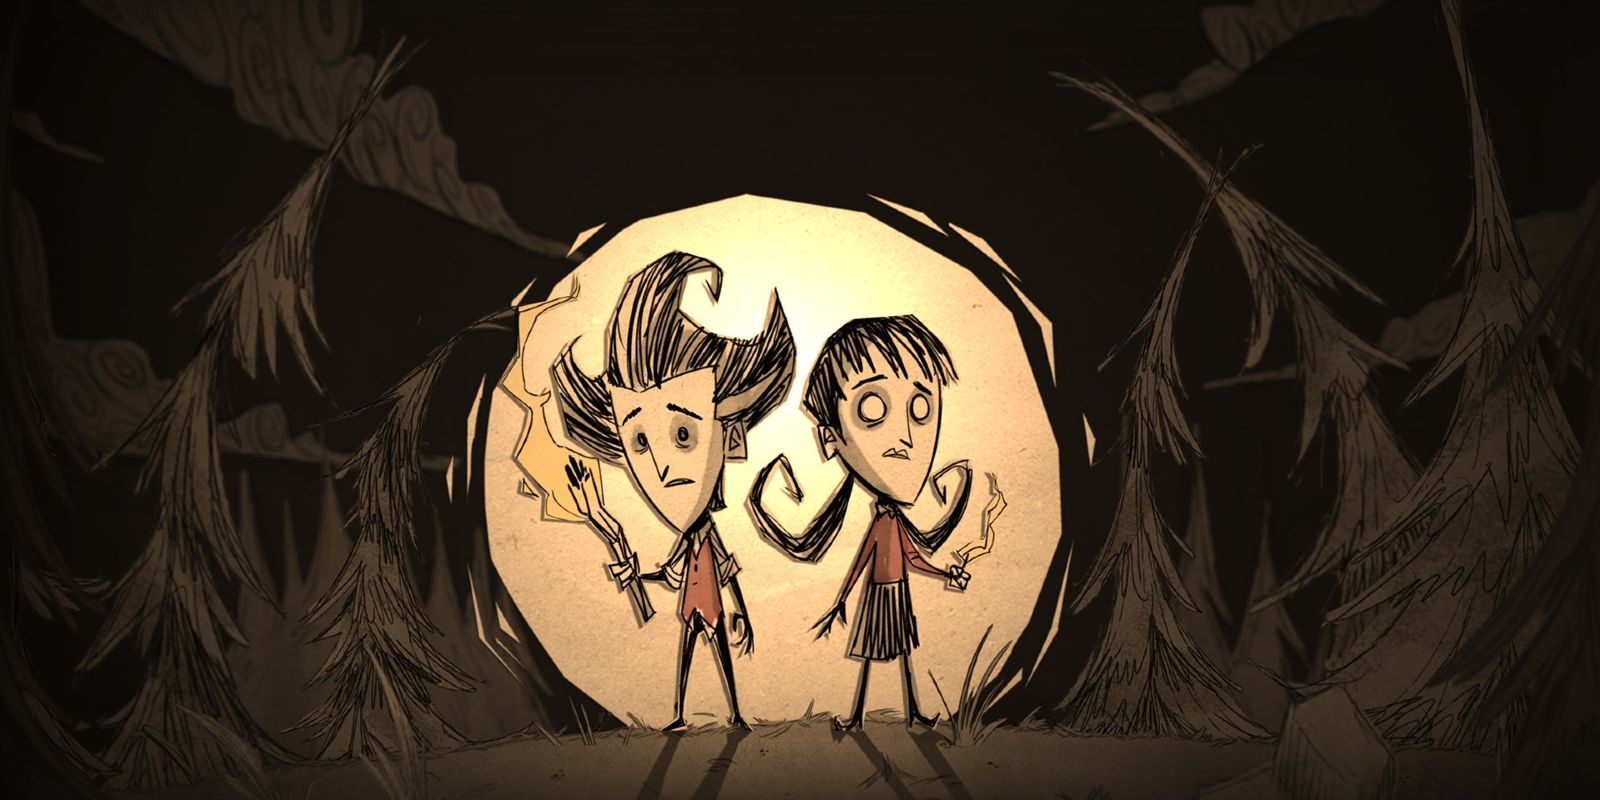 Wilson and Willow standing in the moonlight in Don't Starve Together